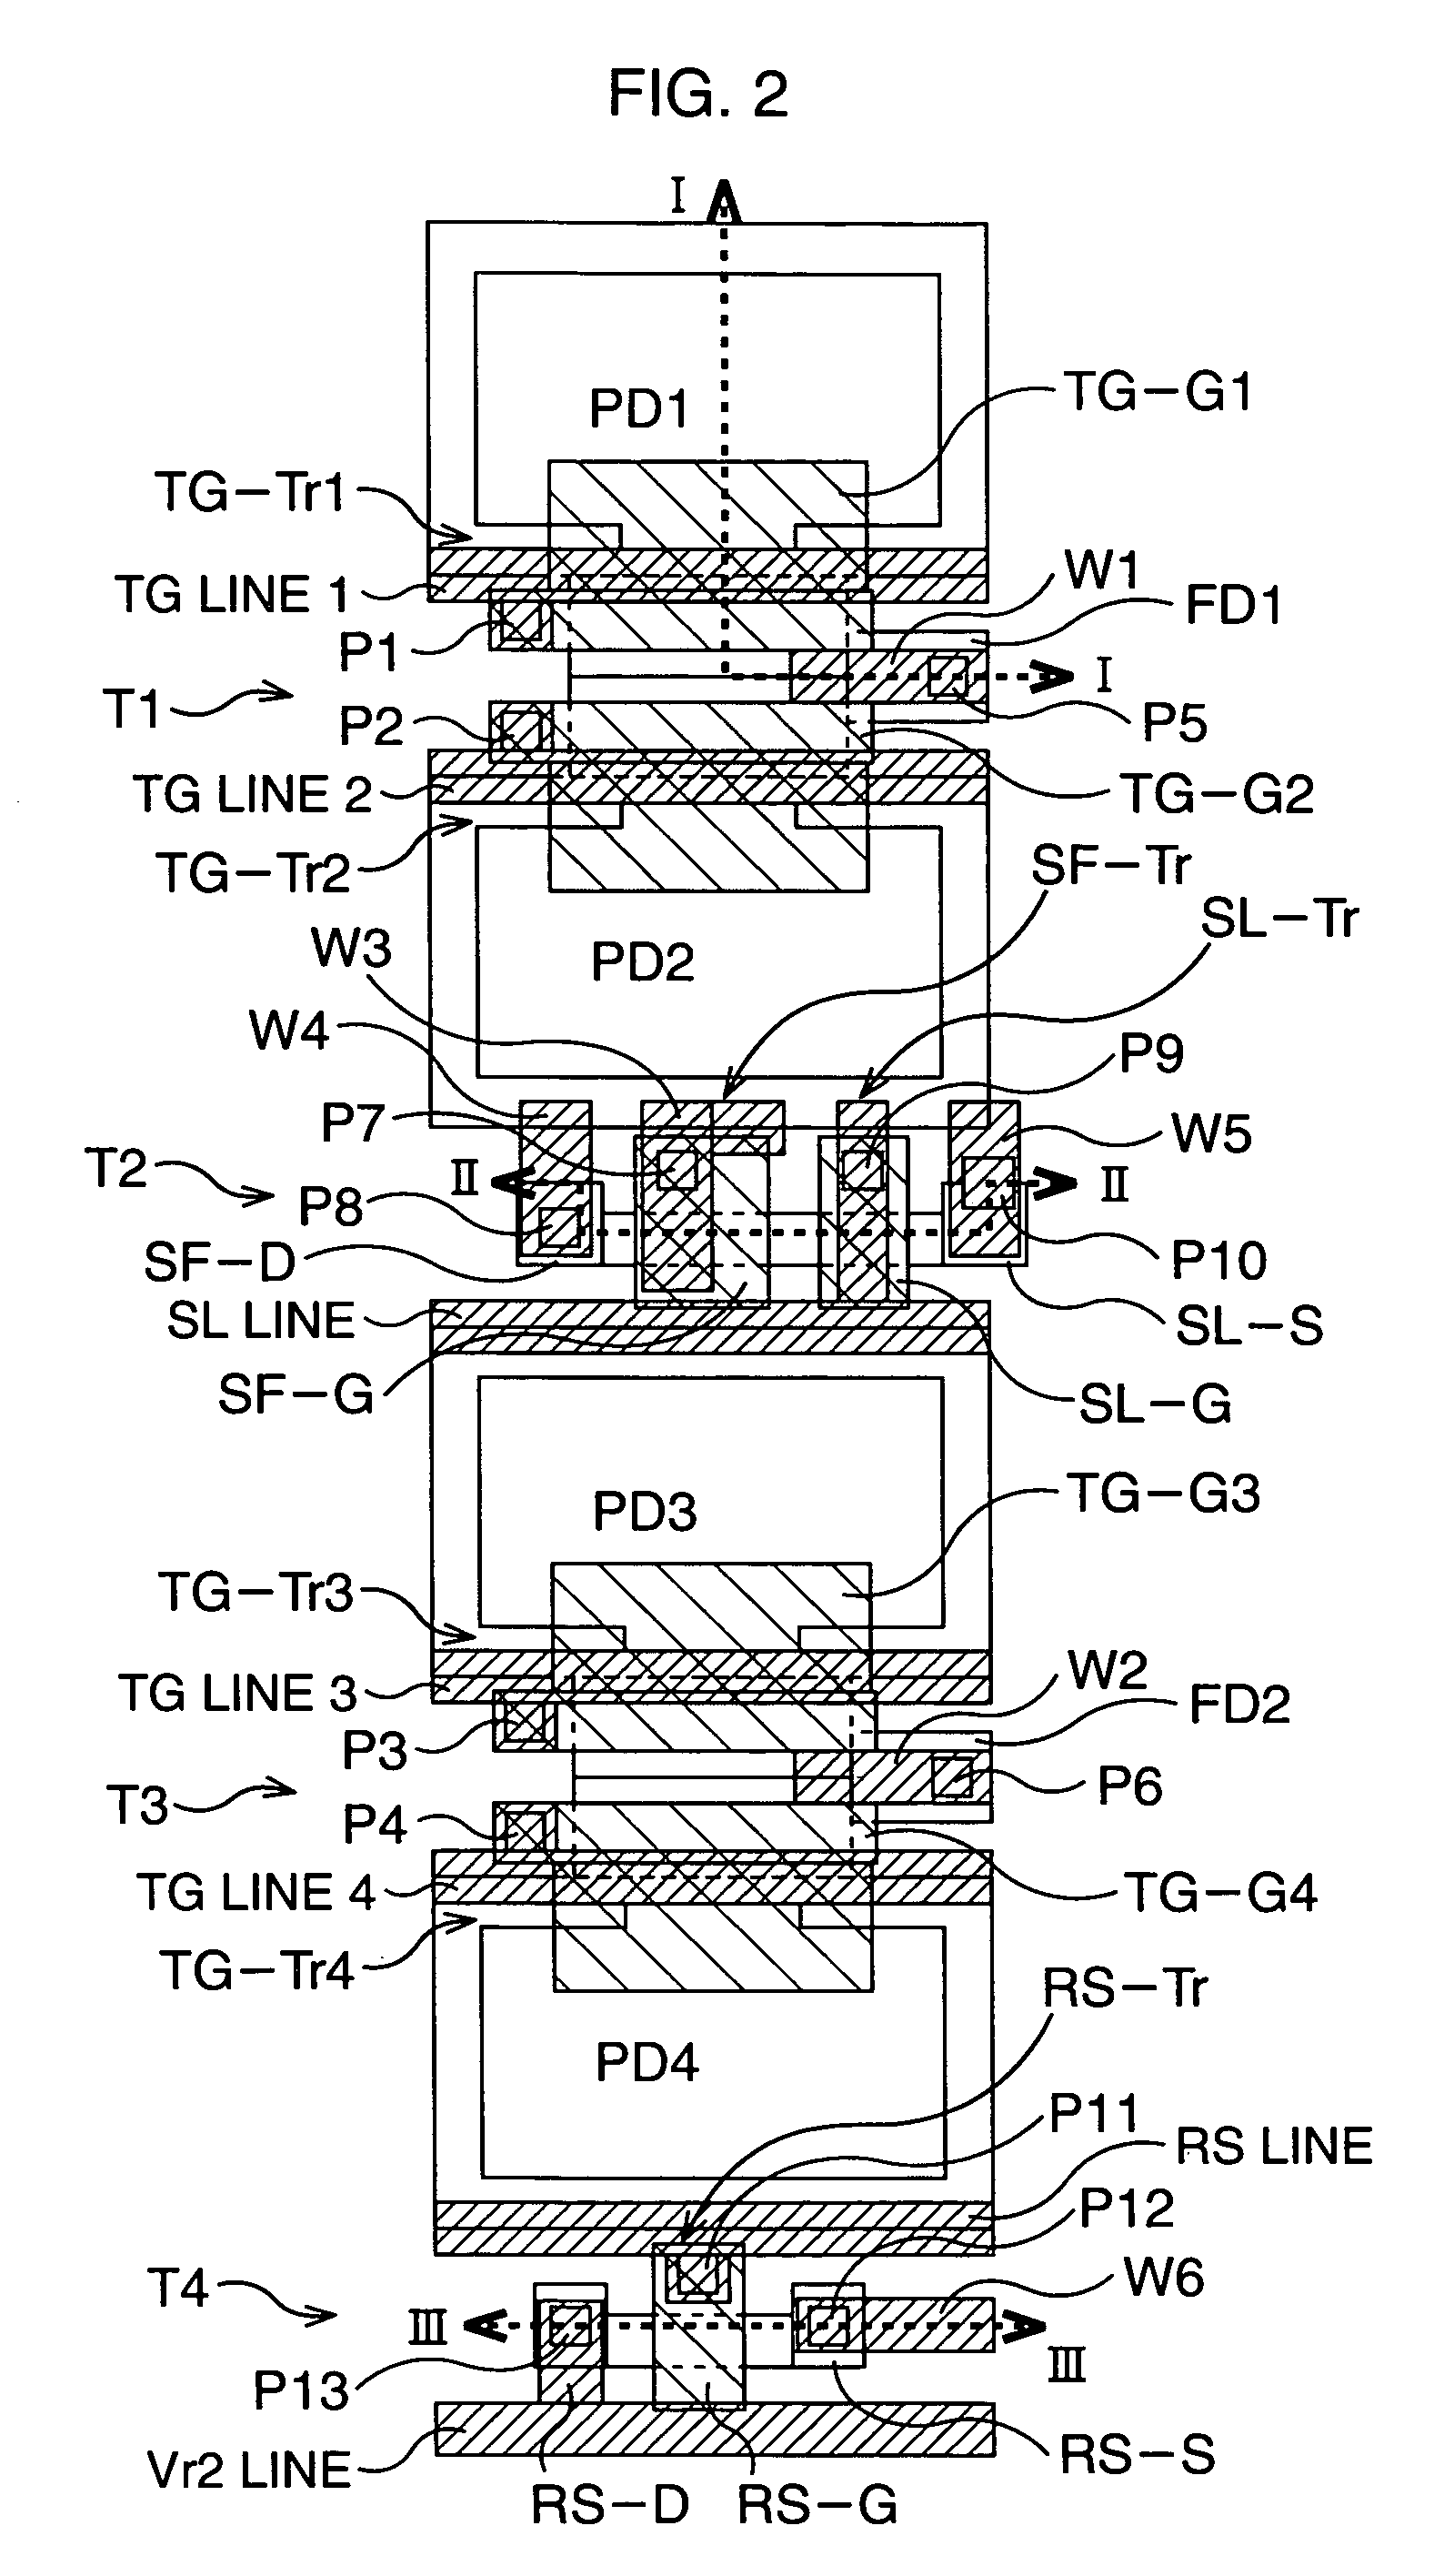 Semiconductor imaging device having a plurality of pixels arranged in a matrix-like pattern